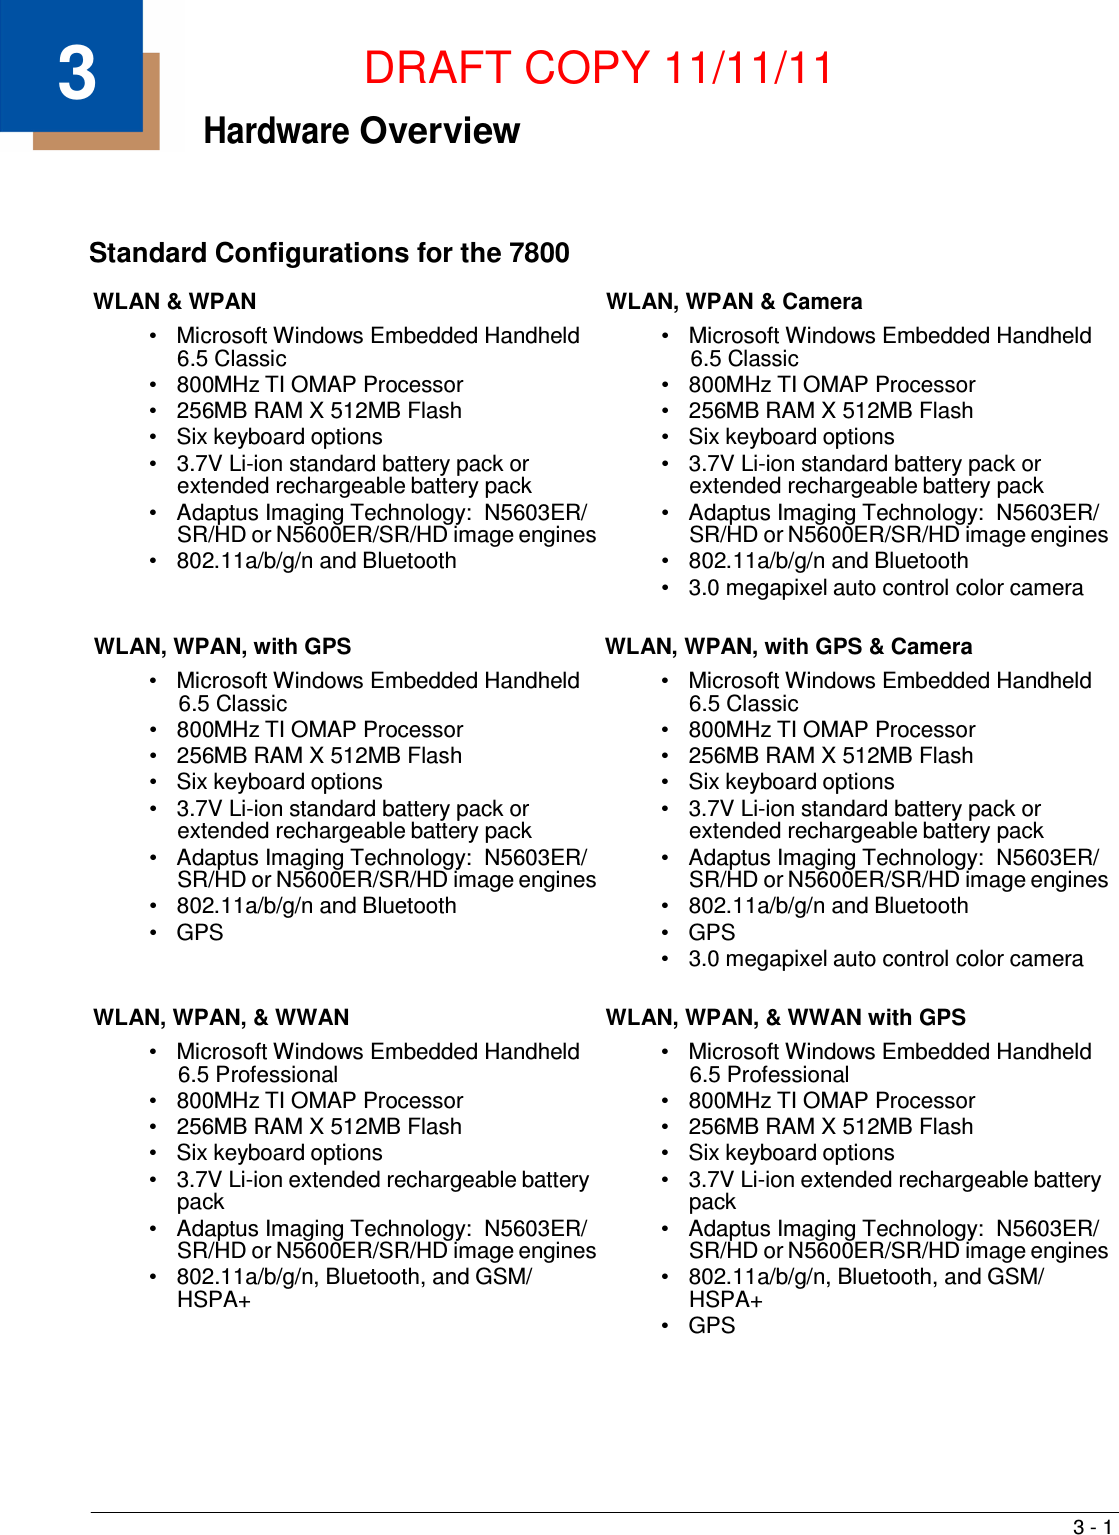 3 - 1   3  DRAFT COPY 11/11/11 Hardware Overview     Standard Configurations for the 7800  WLAN &amp; WPAN •   Microsoft Windows Embedded Handheld 6.5 Classic •   800MHz TI OMAP Processor •   256MB RAM X 512MB Flash •   Six keyboard options •   3.7V Li-ion standard battery pack or extended rechargeable battery pack •   Adaptus Imaging Technology:  N5603ER/ SR/HD or N5600ER/SR/HD image engines •   802.11a/b/g/n and Bluetooth WLAN, WPAN &amp; Camera •   Microsoft Windows Embedded Handheld 6.5 Classic •   800MHz TI OMAP Processor •   256MB RAM X 512MB Flash •   Six keyboard options •   3.7V Li-ion standard battery pack or extended rechargeable battery pack •   Adaptus Imaging Technology:  N5603ER/ SR/HD or N5600ER/SR/HD image engines •   802.11a/b/g/n and Bluetooth •   3.0 megapixel auto control color camera   WLAN, WPAN, with GPS •   Microsoft Windows Embedded Handheld 6.5 Classic •   800MHz TI OMAP Processor •   256MB RAM X 512MB Flash •   Six keyboard options •   3.7V Li-ion standard battery pack or extended rechargeable battery pack •   Adaptus Imaging Technology:  N5603ER/ SR/HD or N5600ER/SR/HD image engines •   802.11a/b/g/n and Bluetooth •   GPS WLAN, WPAN, with GPS &amp; Camera •   Microsoft Windows Embedded Handheld 6.5 Classic •   800MHz TI OMAP Processor •   256MB RAM X 512MB Flash •   Six keyboard options •   3.7V Li-ion standard battery pack or extended rechargeable battery pack •   Adaptus Imaging Technology:  N5603ER/ SR/HD or N5600ER/SR/HD image engines •   802.11a/b/g/n and Bluetooth •   GPS •   3.0 megapixel auto control color camera   WLAN, WPAN, &amp; WWAN •   Microsoft Windows Embedded Handheld 6.5 Professional •   800MHz TI OMAP Processor •   256MB RAM X 512MB Flash •   Six keyboard options •   3.7V Li-ion extended rechargeable battery pack •   Adaptus Imaging Technology:  N5603ER/ SR/HD or N5600ER/SR/HD image engines •   802.11a/b/g/n, Bluetooth, and GSM/ HSPA+ WLAN, WPAN, &amp; WWAN with GPS •   Microsoft Windows Embedded Handheld 6.5 Professional •   800MHz TI OMAP Processor •   256MB RAM X 512MB Flash •   Six keyboard options •   3.7V Li-ion extended rechargeable battery pack •   Adaptus Imaging Technology:  N5603ER/ SR/HD or N5600ER/SR/HD image engines •   802.11a/b/g/n, Bluetooth, and GSM/ HSPA+ •   GPS 